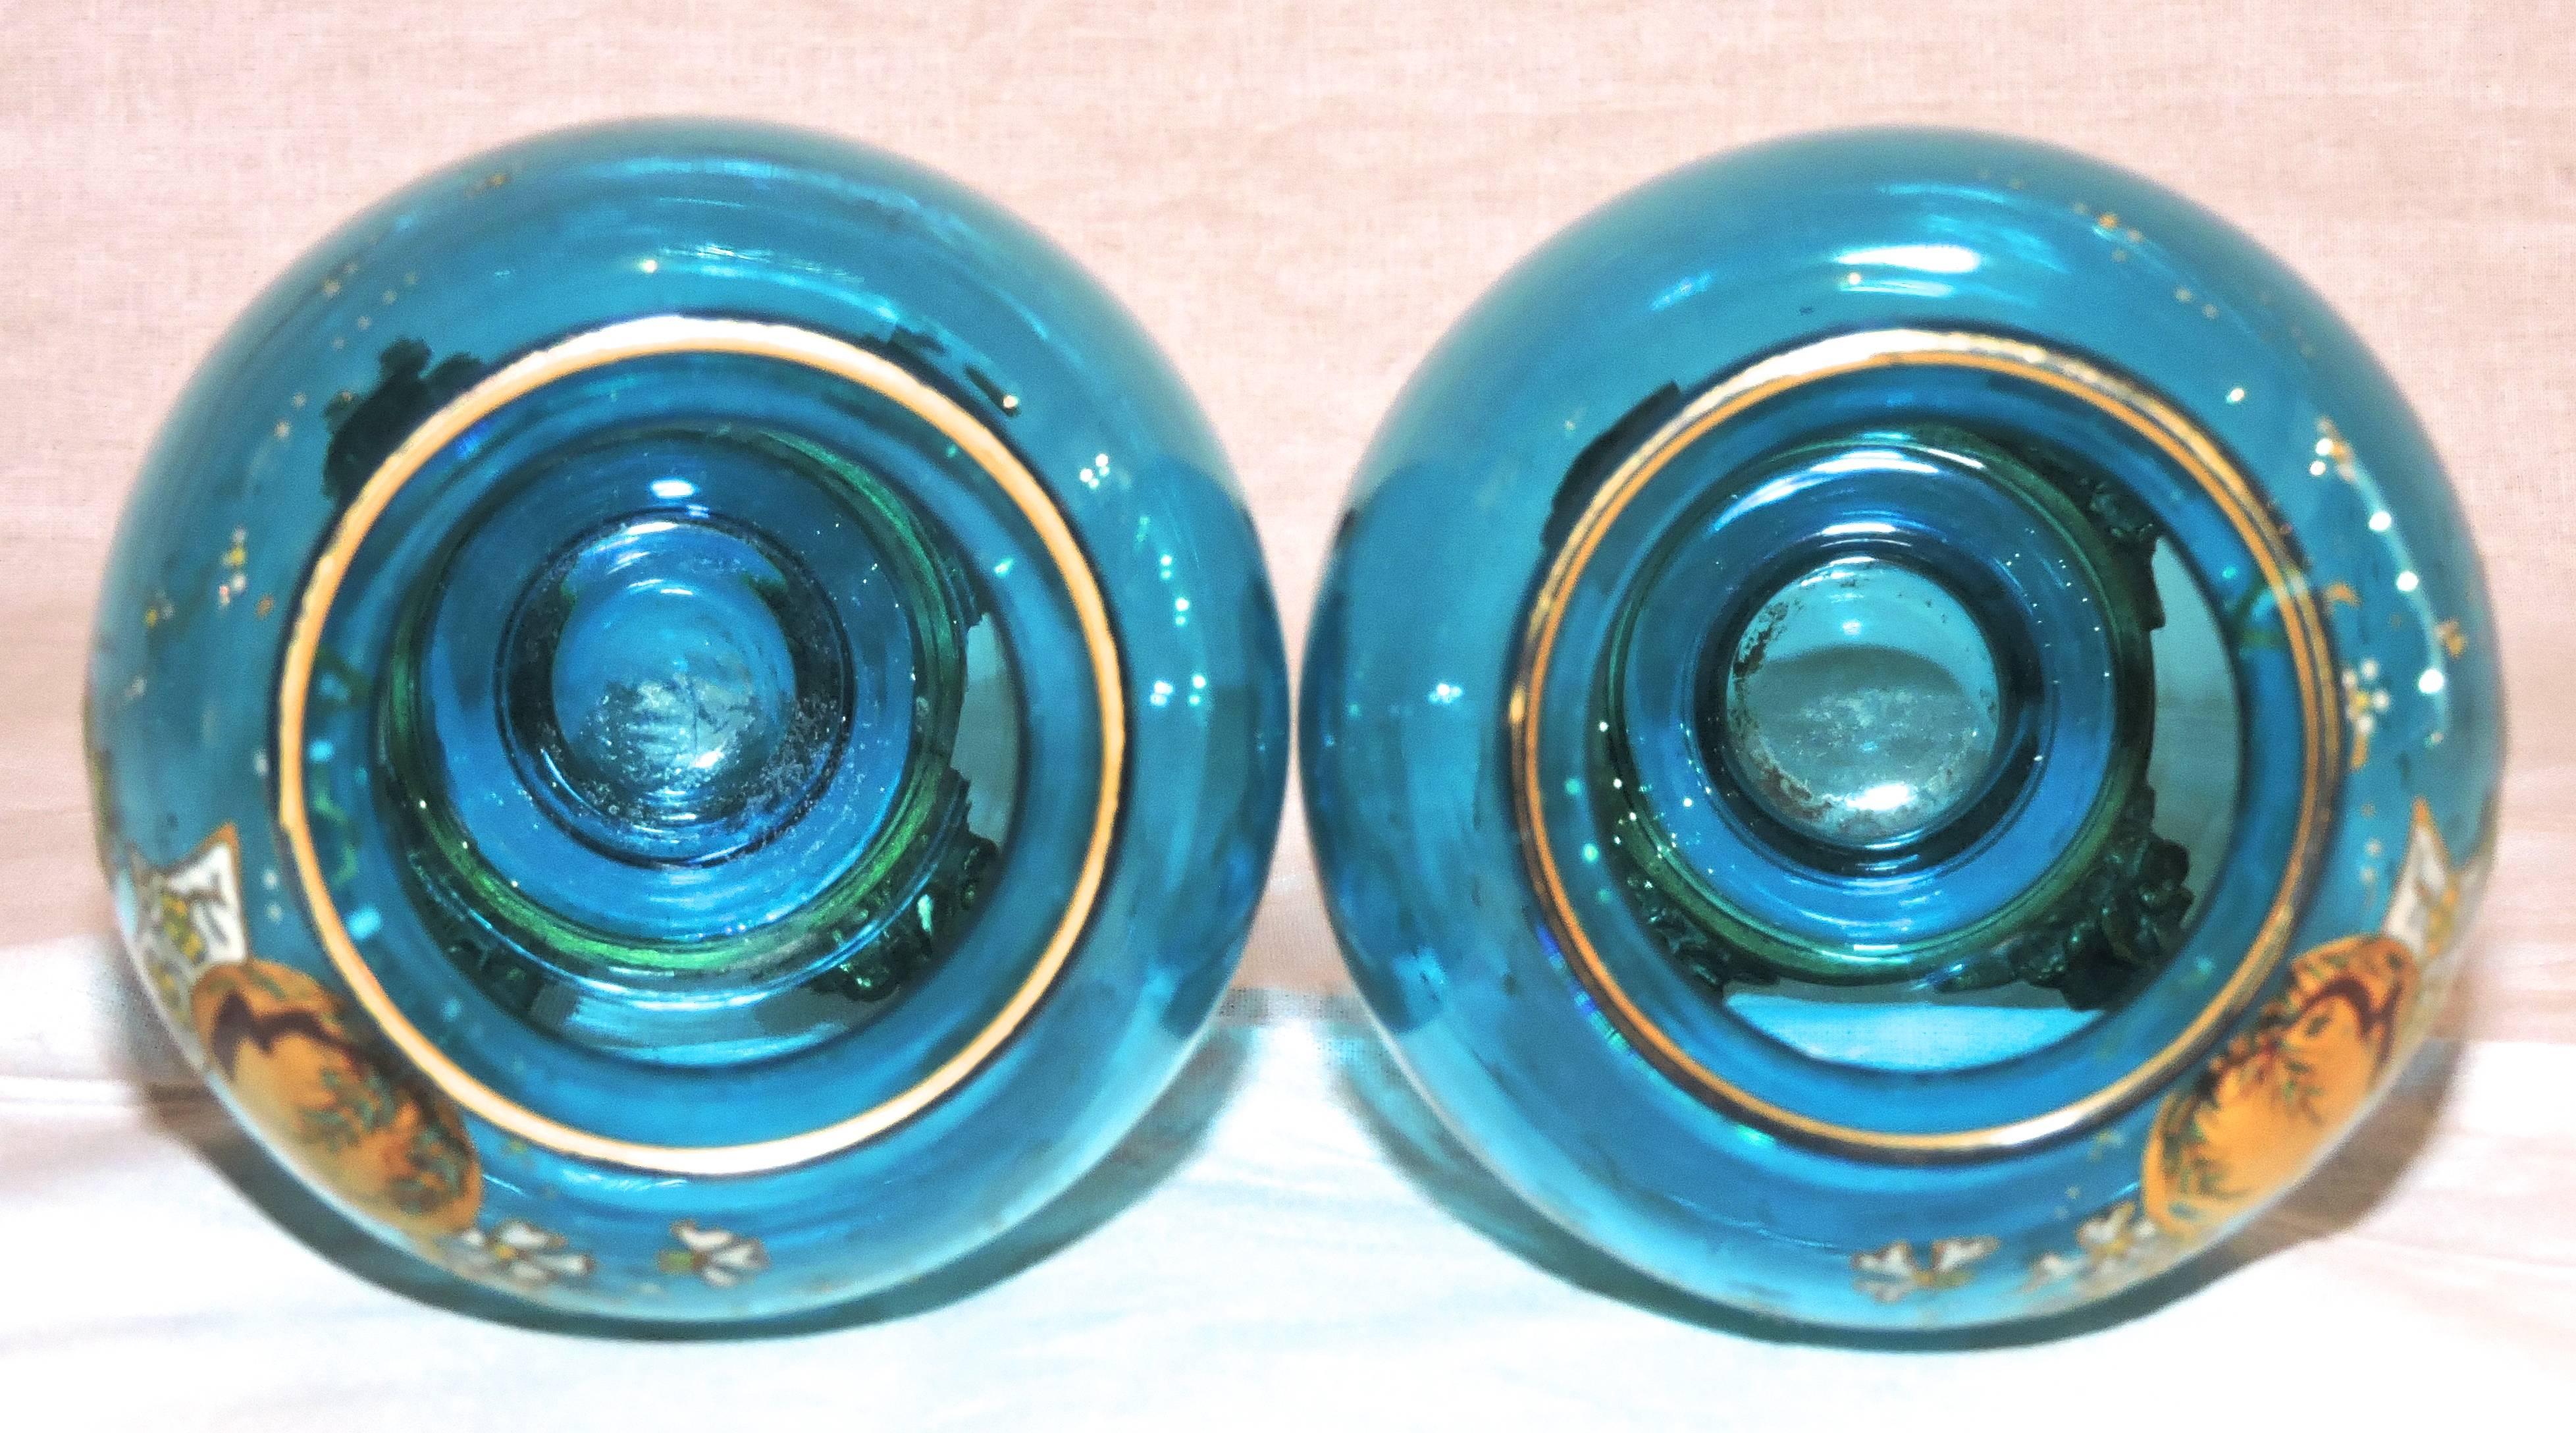 19th Century Pair of French Japonisme Blue Crystal Enamel Vases Attributed to Baccarat